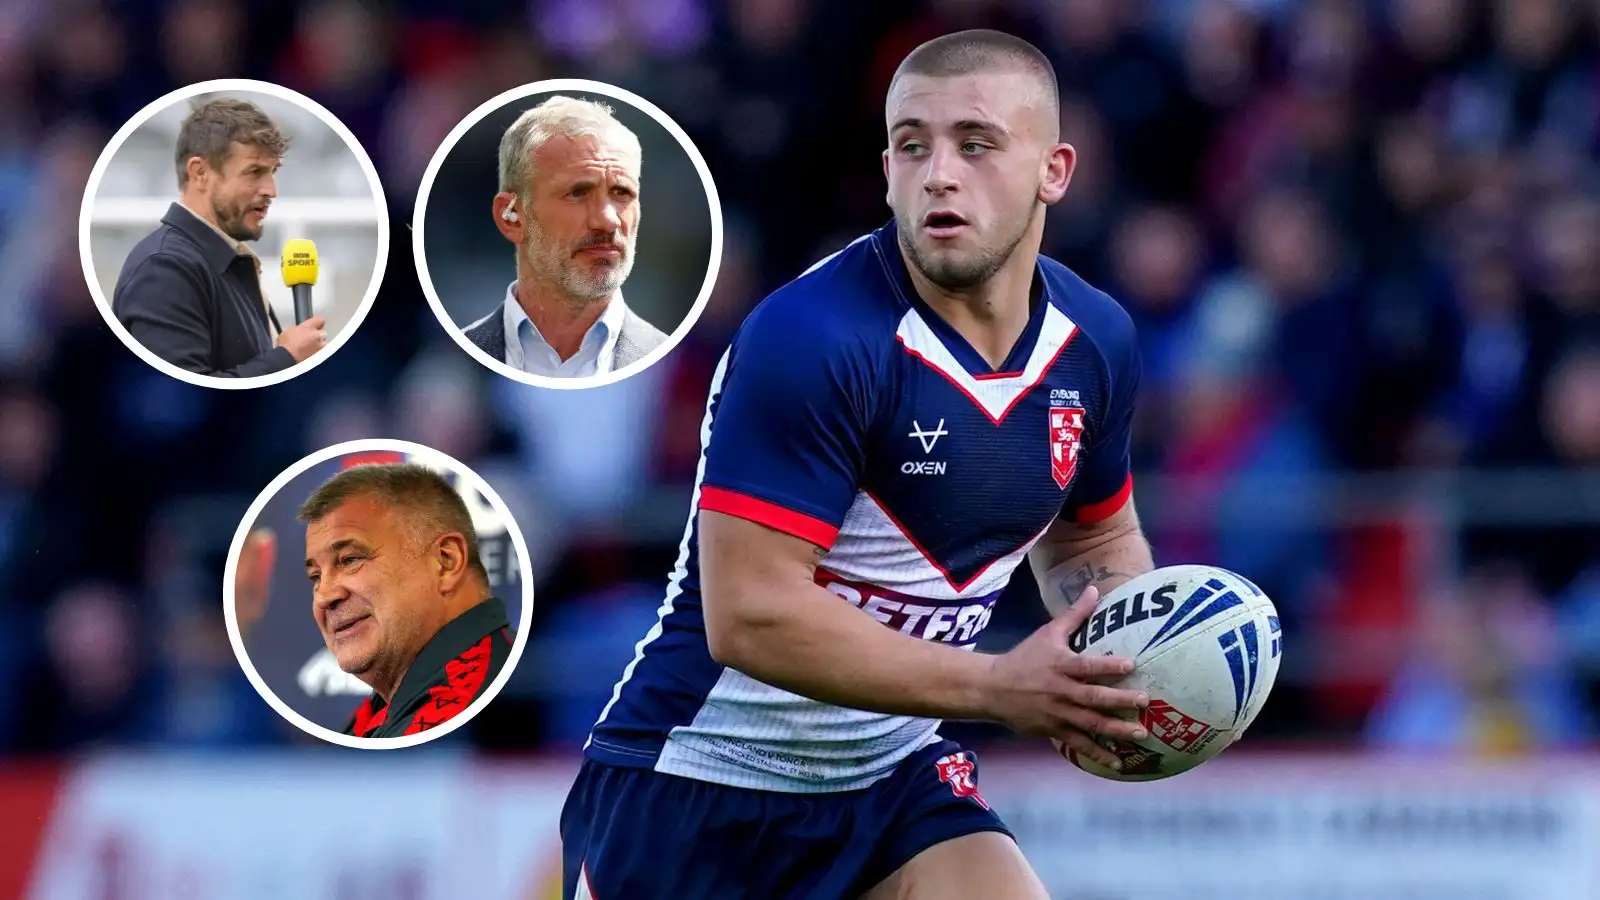 Jon Wilkin, Jamie Peacock rave over Mikey Lewis’ England debut as boss Shaun Wane insists there’s plenty more to come from young gun